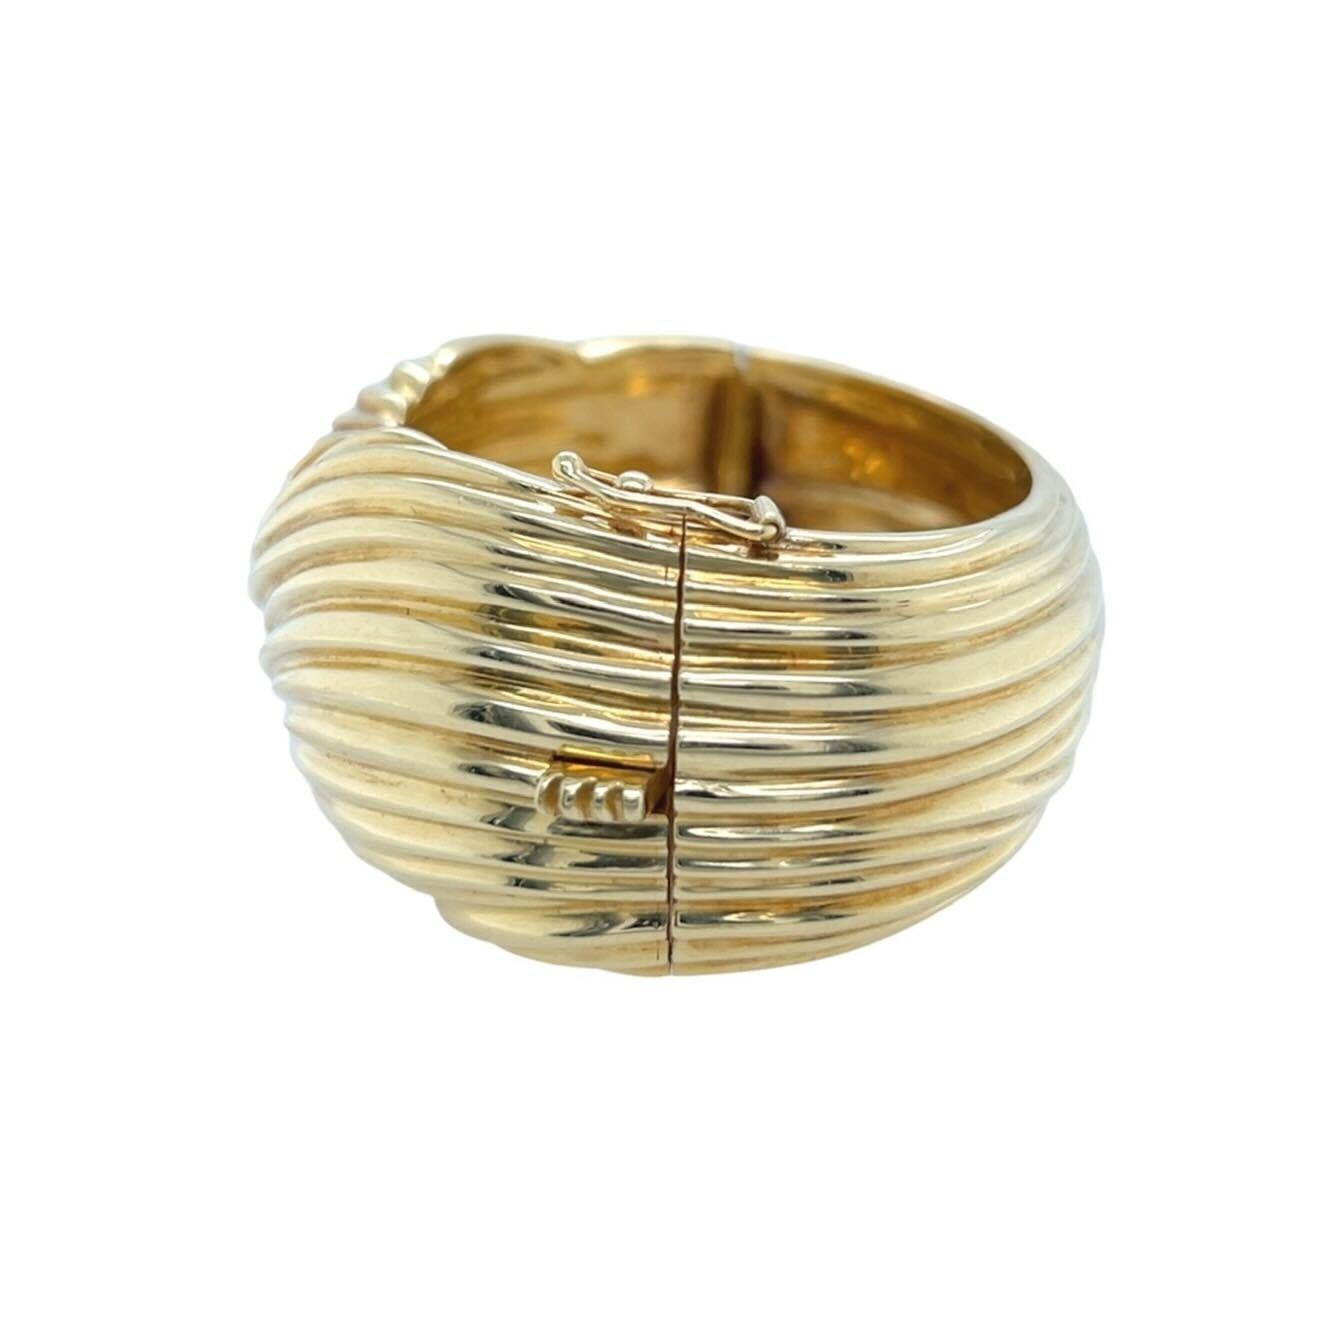 An 18 karat yellow gold bracelet.  Designed as subtly tapering hinged cuff bangle displaying interlocking waves of striated gold.  Inner circumference approximately 6 1/4 inches, width at widest point approximately 1 1/4 inches.  Gross weight